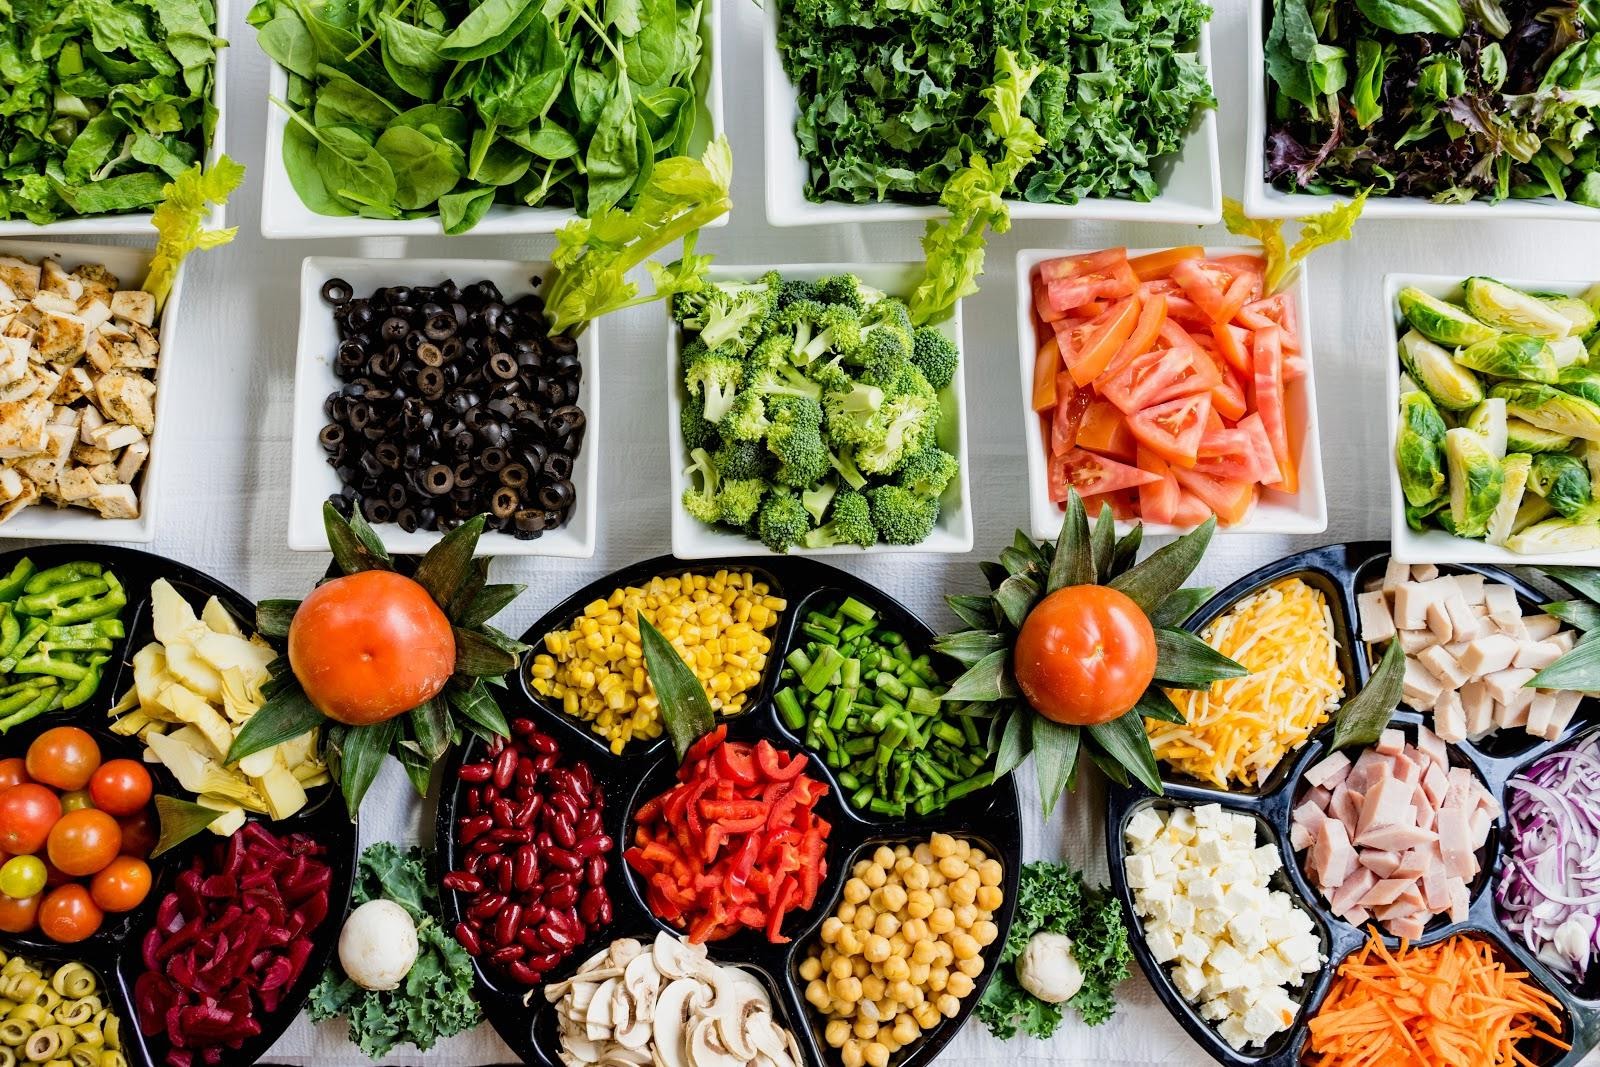 Fruits and vegetables are two of the healthiest food groups we can eat in our daily diet. These two food groups can lower the risk for many chronic health conditions, improve energy levels, and decrease the chance of becoming overweight and obese. 